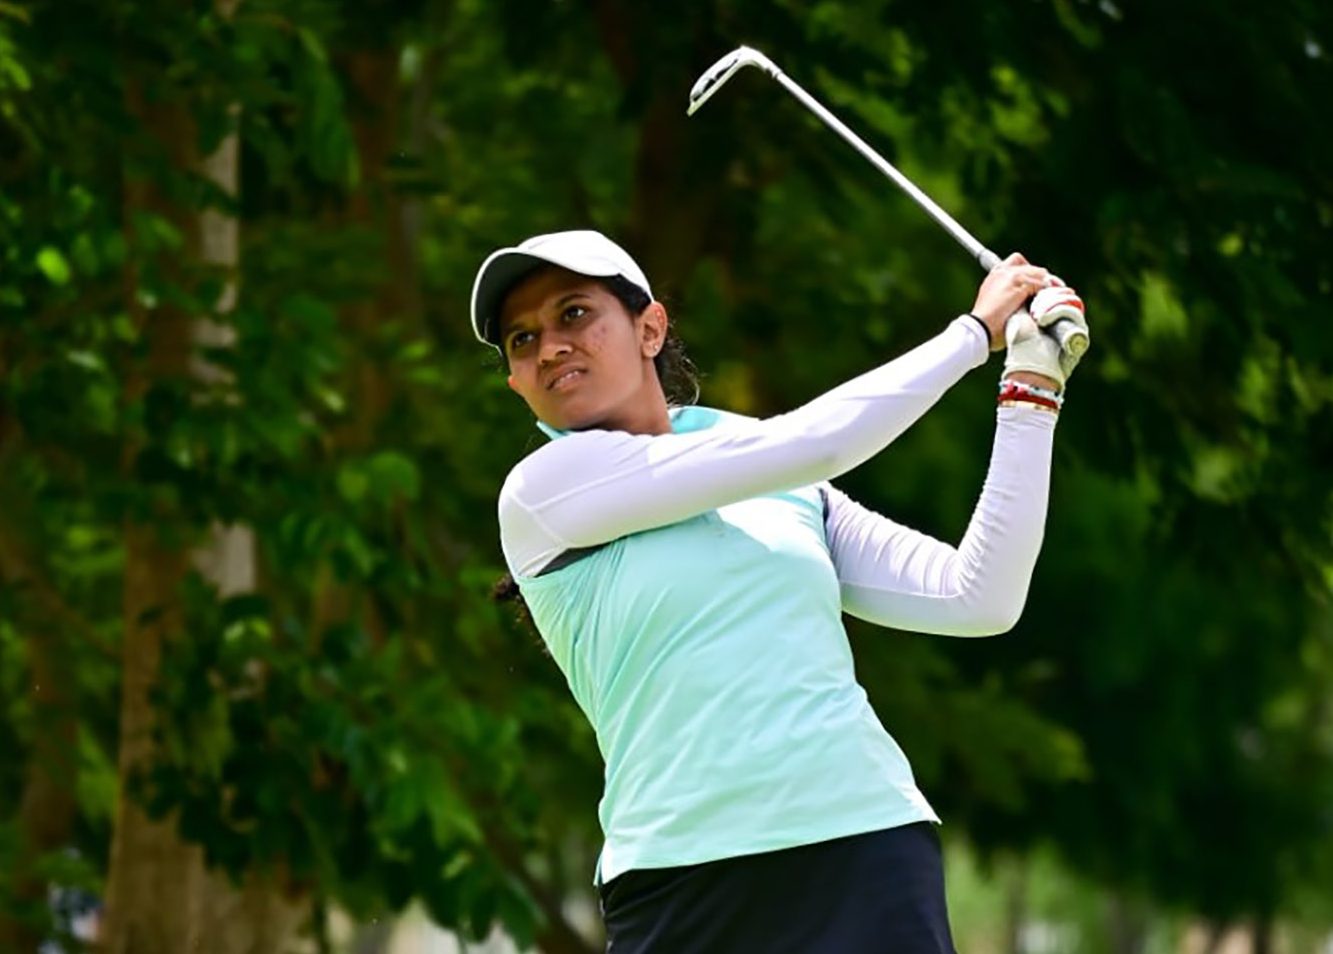 Pranavi rallies to get back into contention at the 8th leg of the Hero WPGT